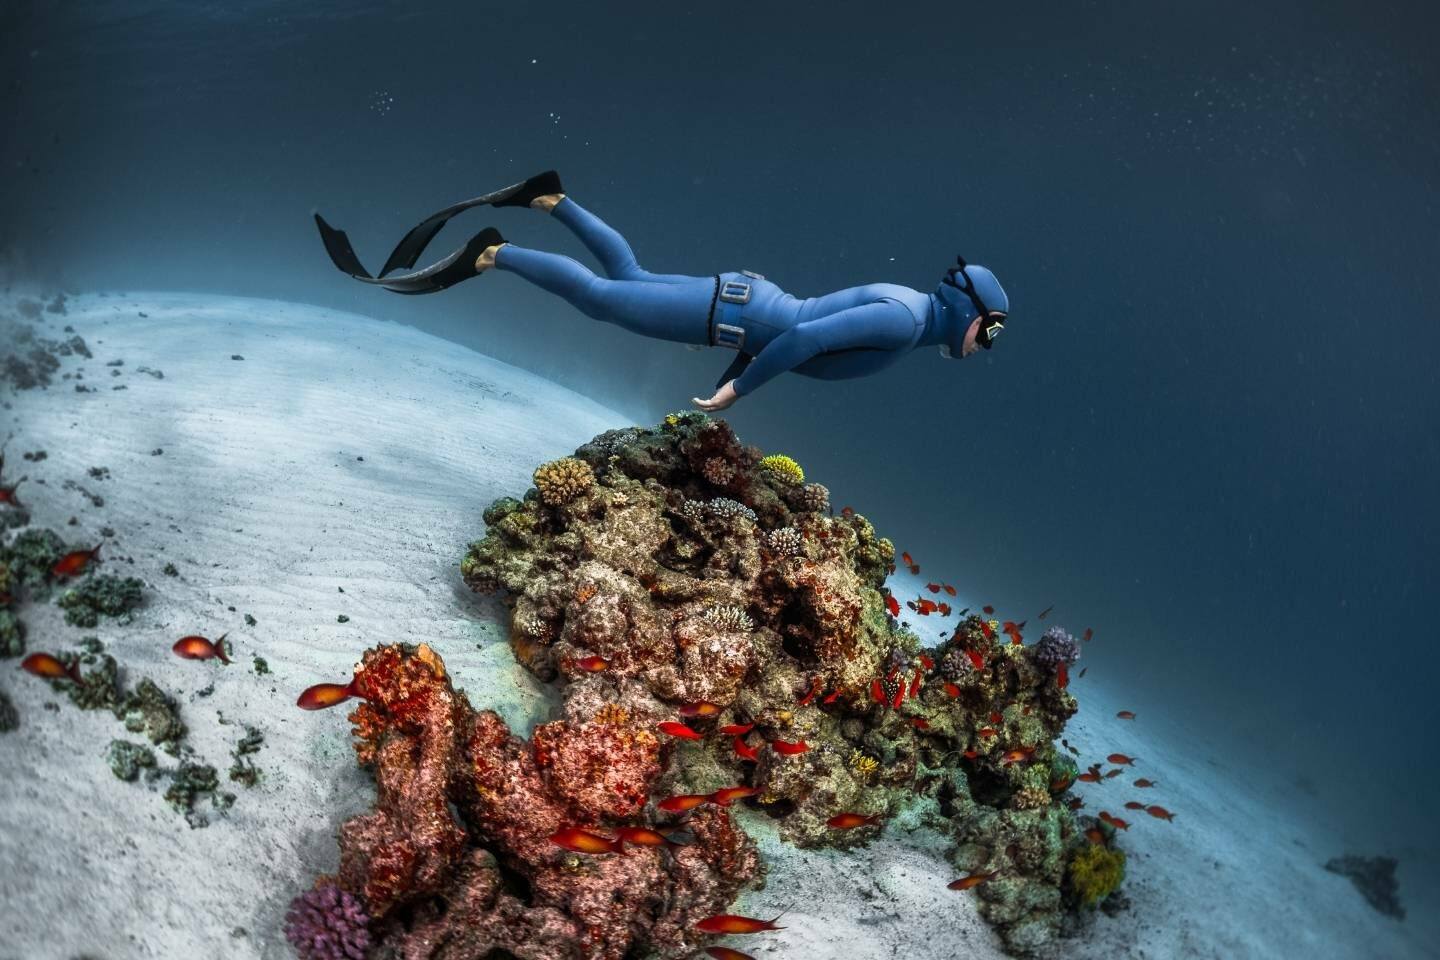 A freediver in a blue freediving wetsuit under the sea